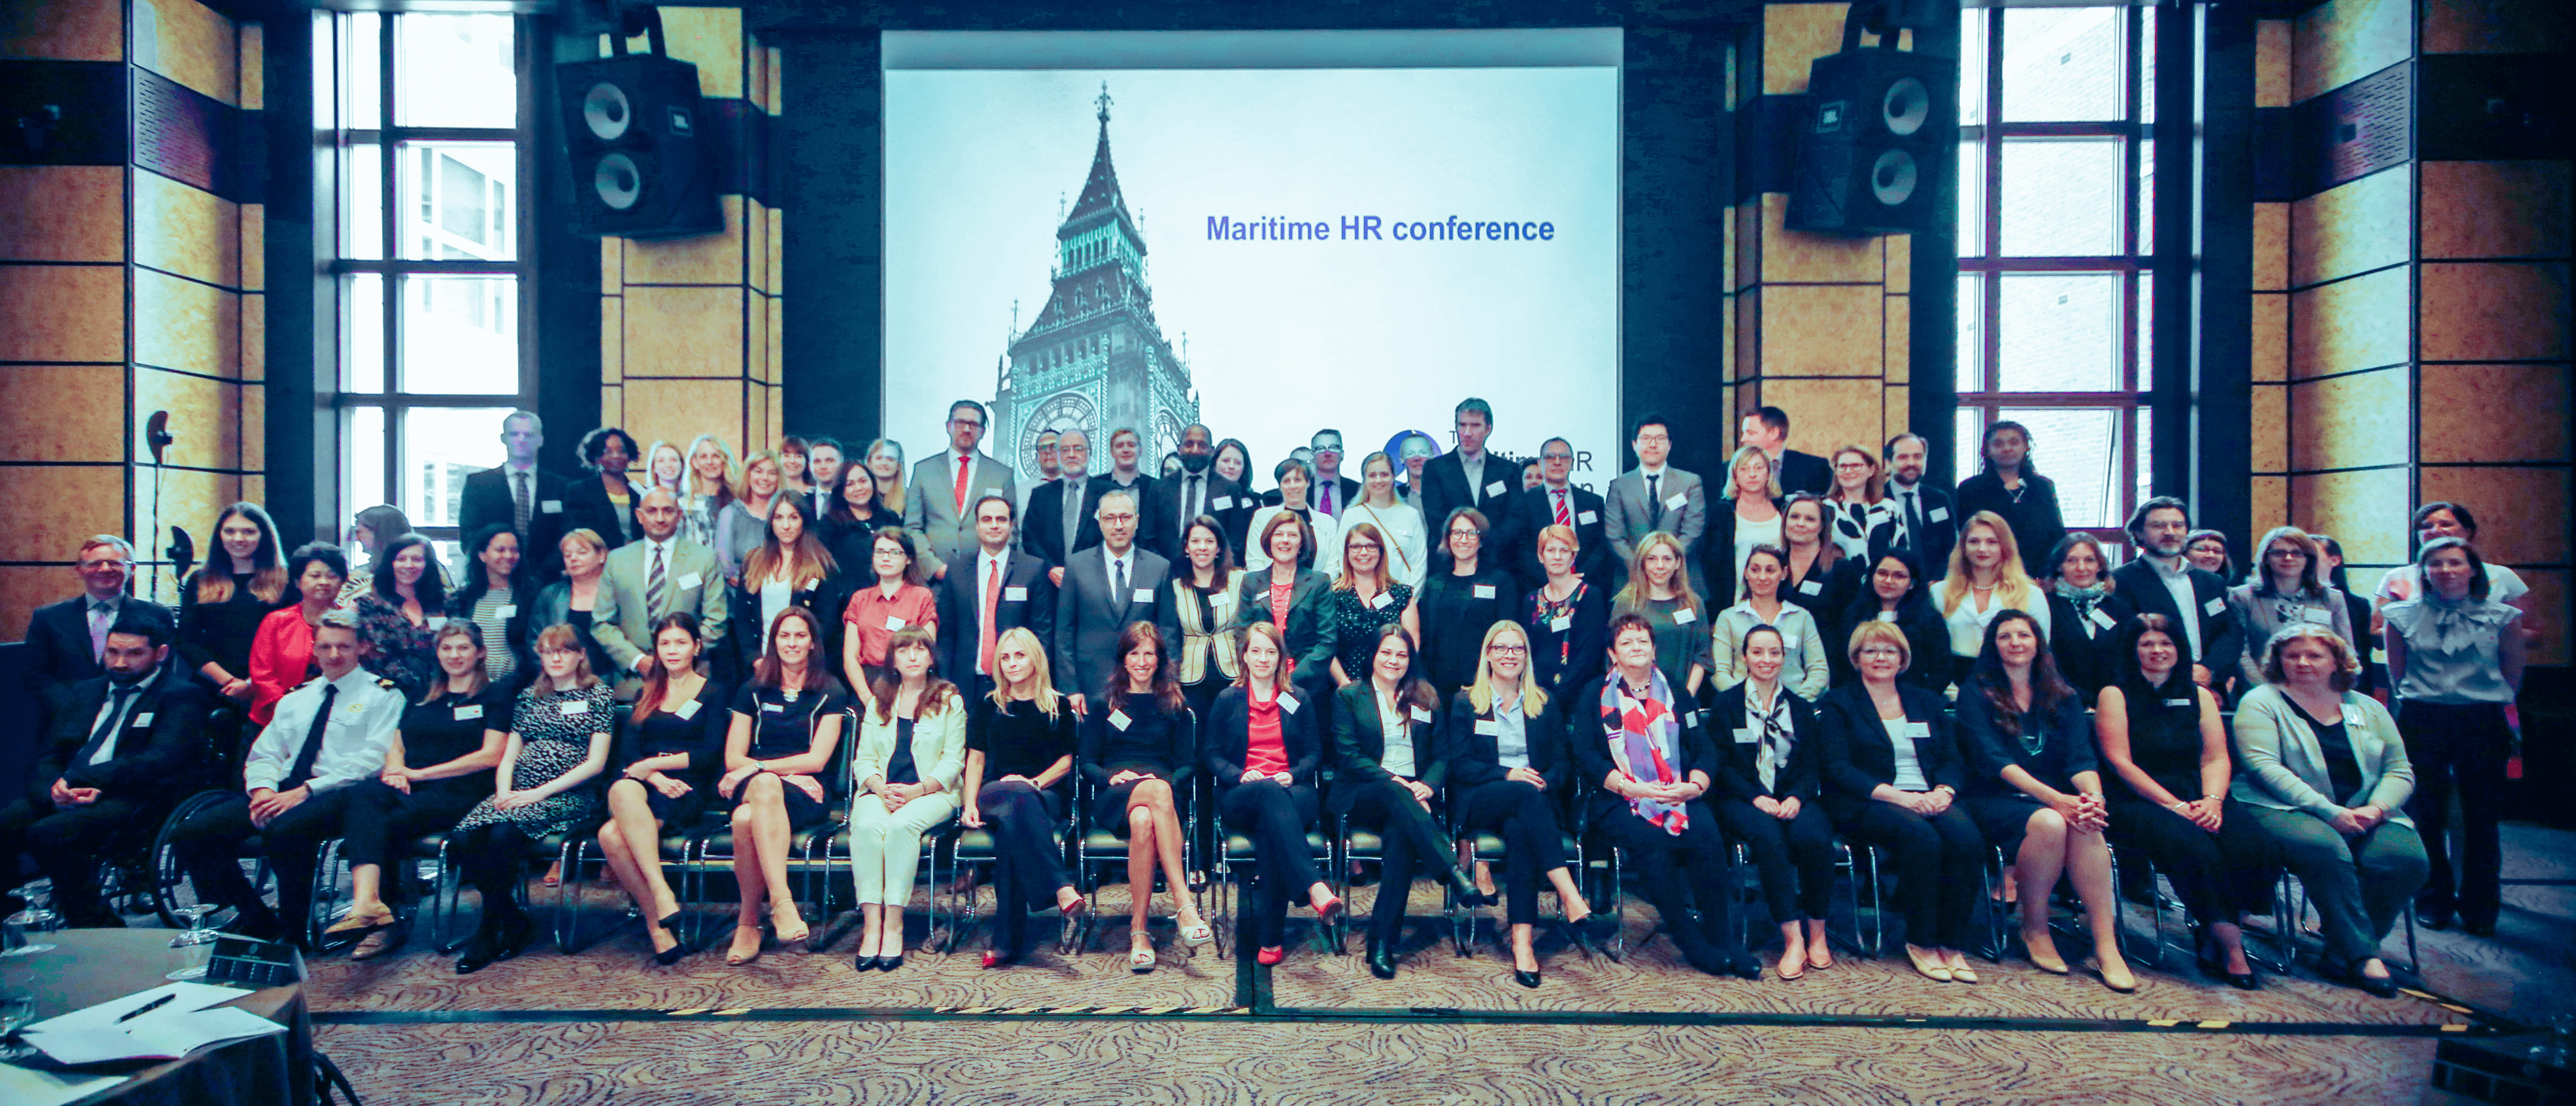 Maritime HR conference attendees